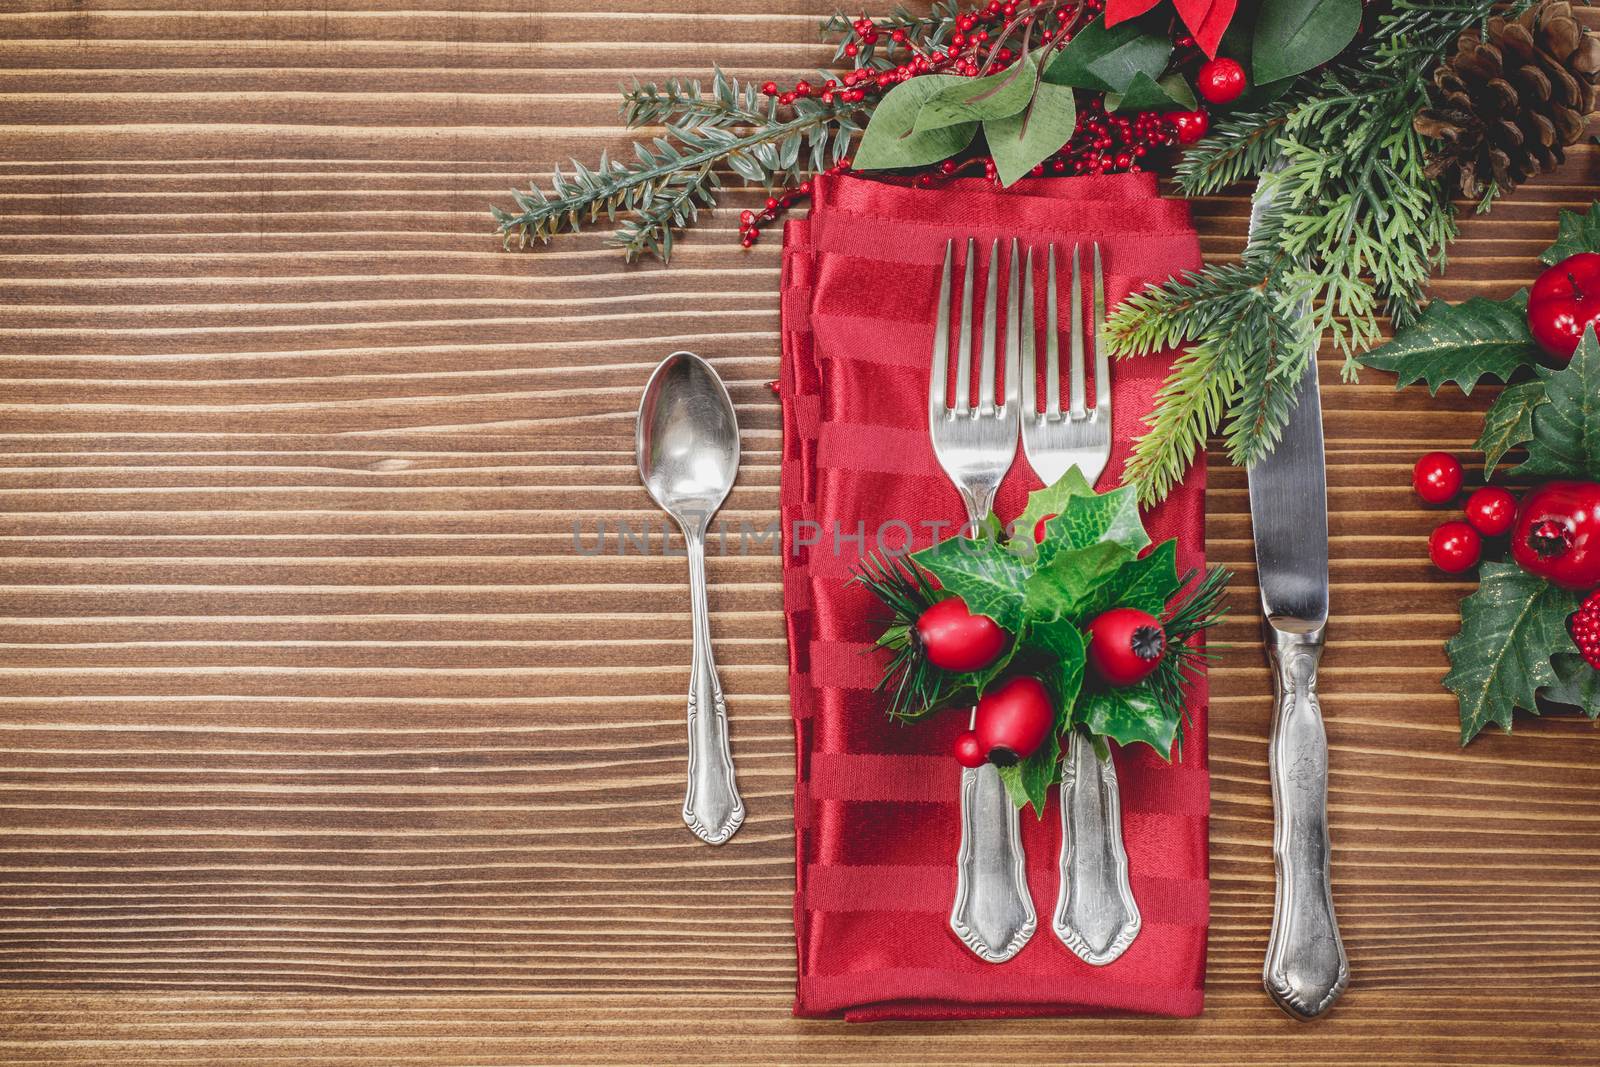 Christmas background with silverware and fir tree. A knife, spoon and two forks on a napkin on a textured tablecloth. Christmas vintage concept.